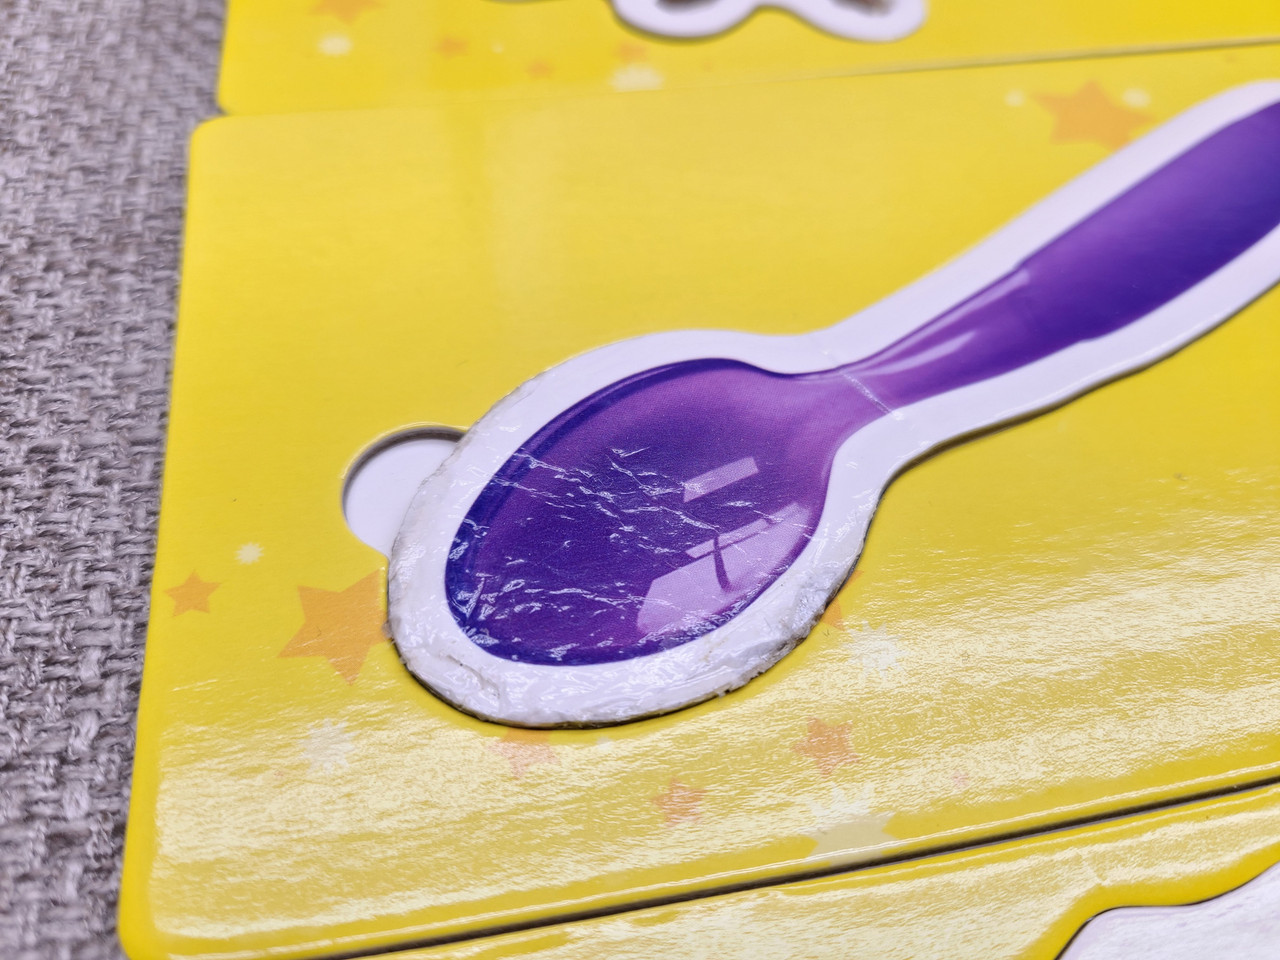 This is the "spoon" First Words Card that has teeth marks on it